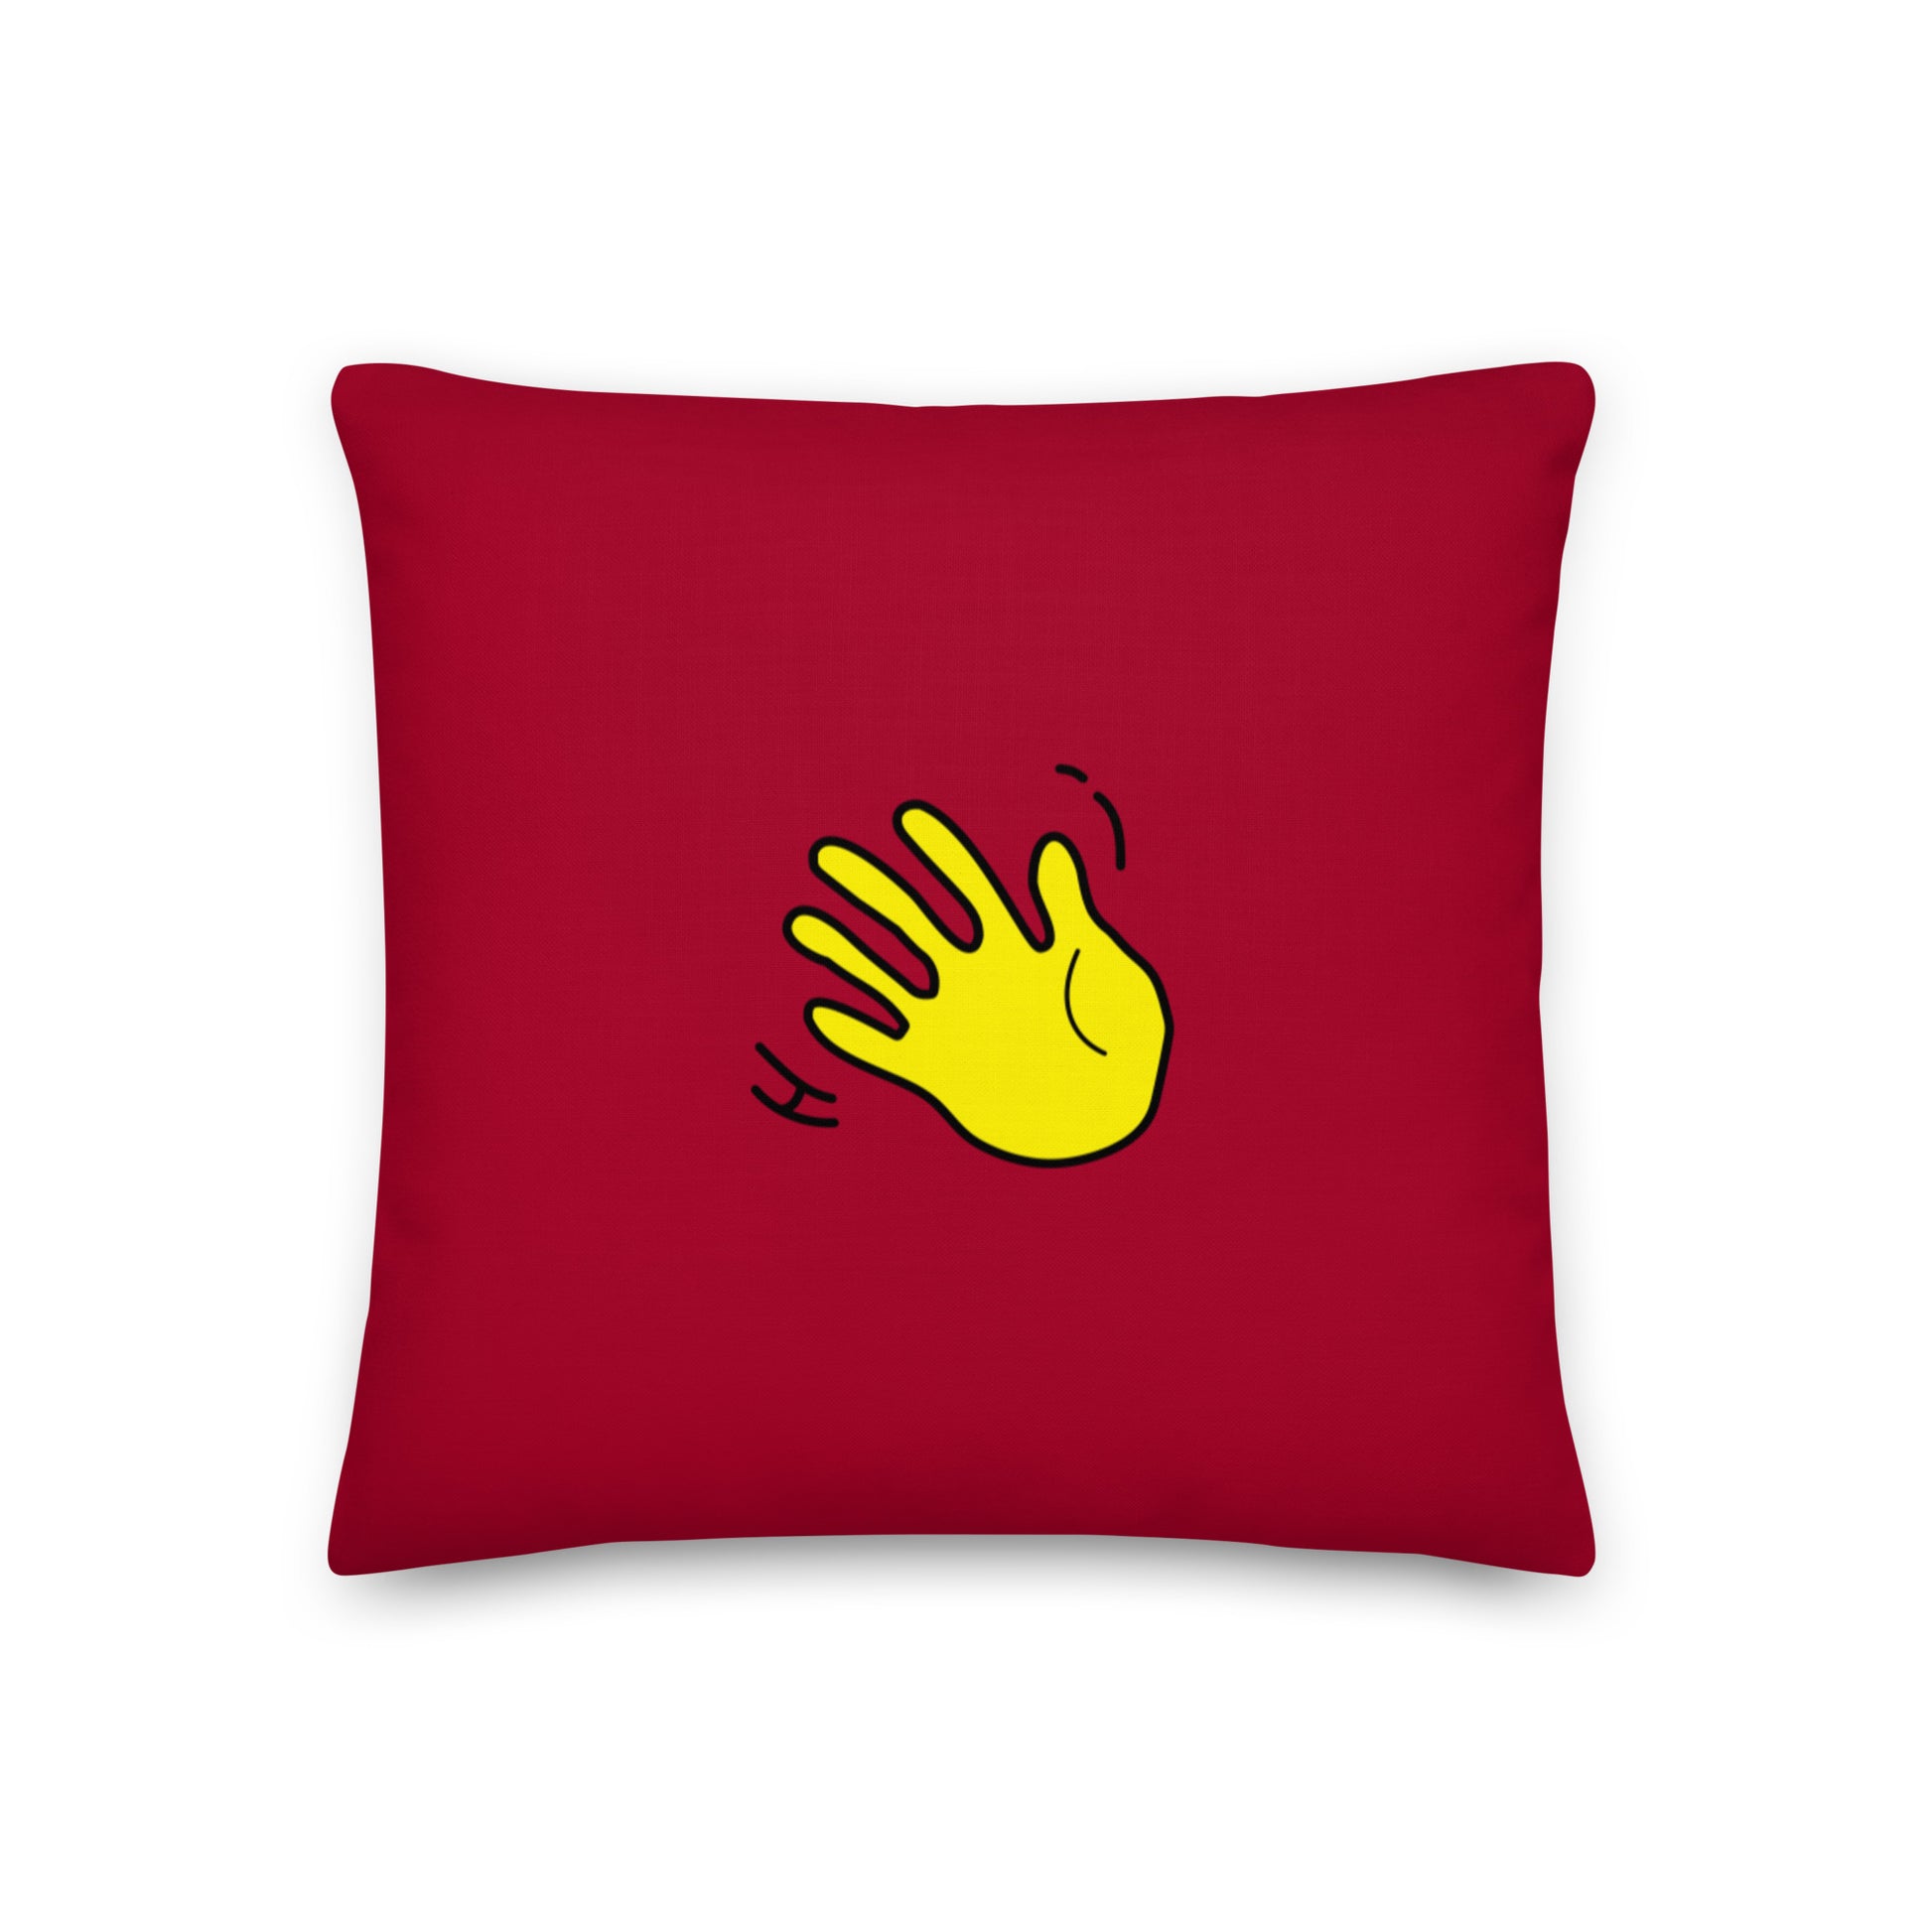 Hi Pillow in red with Hi emoji by HiJohnny.com